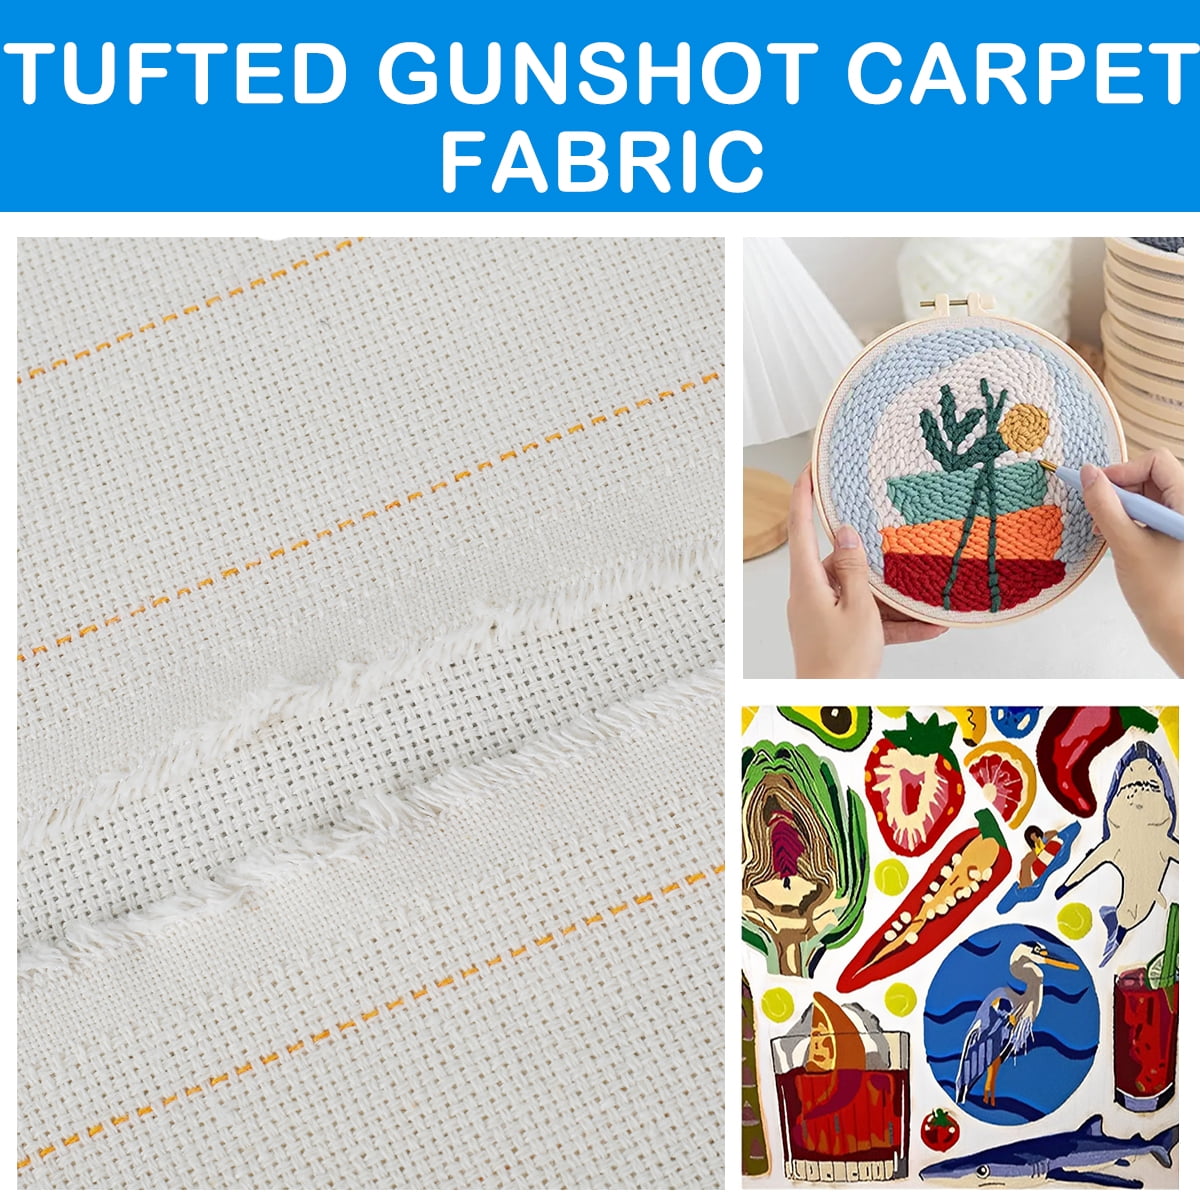  82.7x78.7in Large Size Primary Tufting Cloth with Marked Lines,  Premium Monks Cloth Punch Needle Cloth Fabric for Tufting Gun, Rug-Punch,  Punch Needle, Tuft Word Art Embroidery Crafts Favors : Arts, Crafts